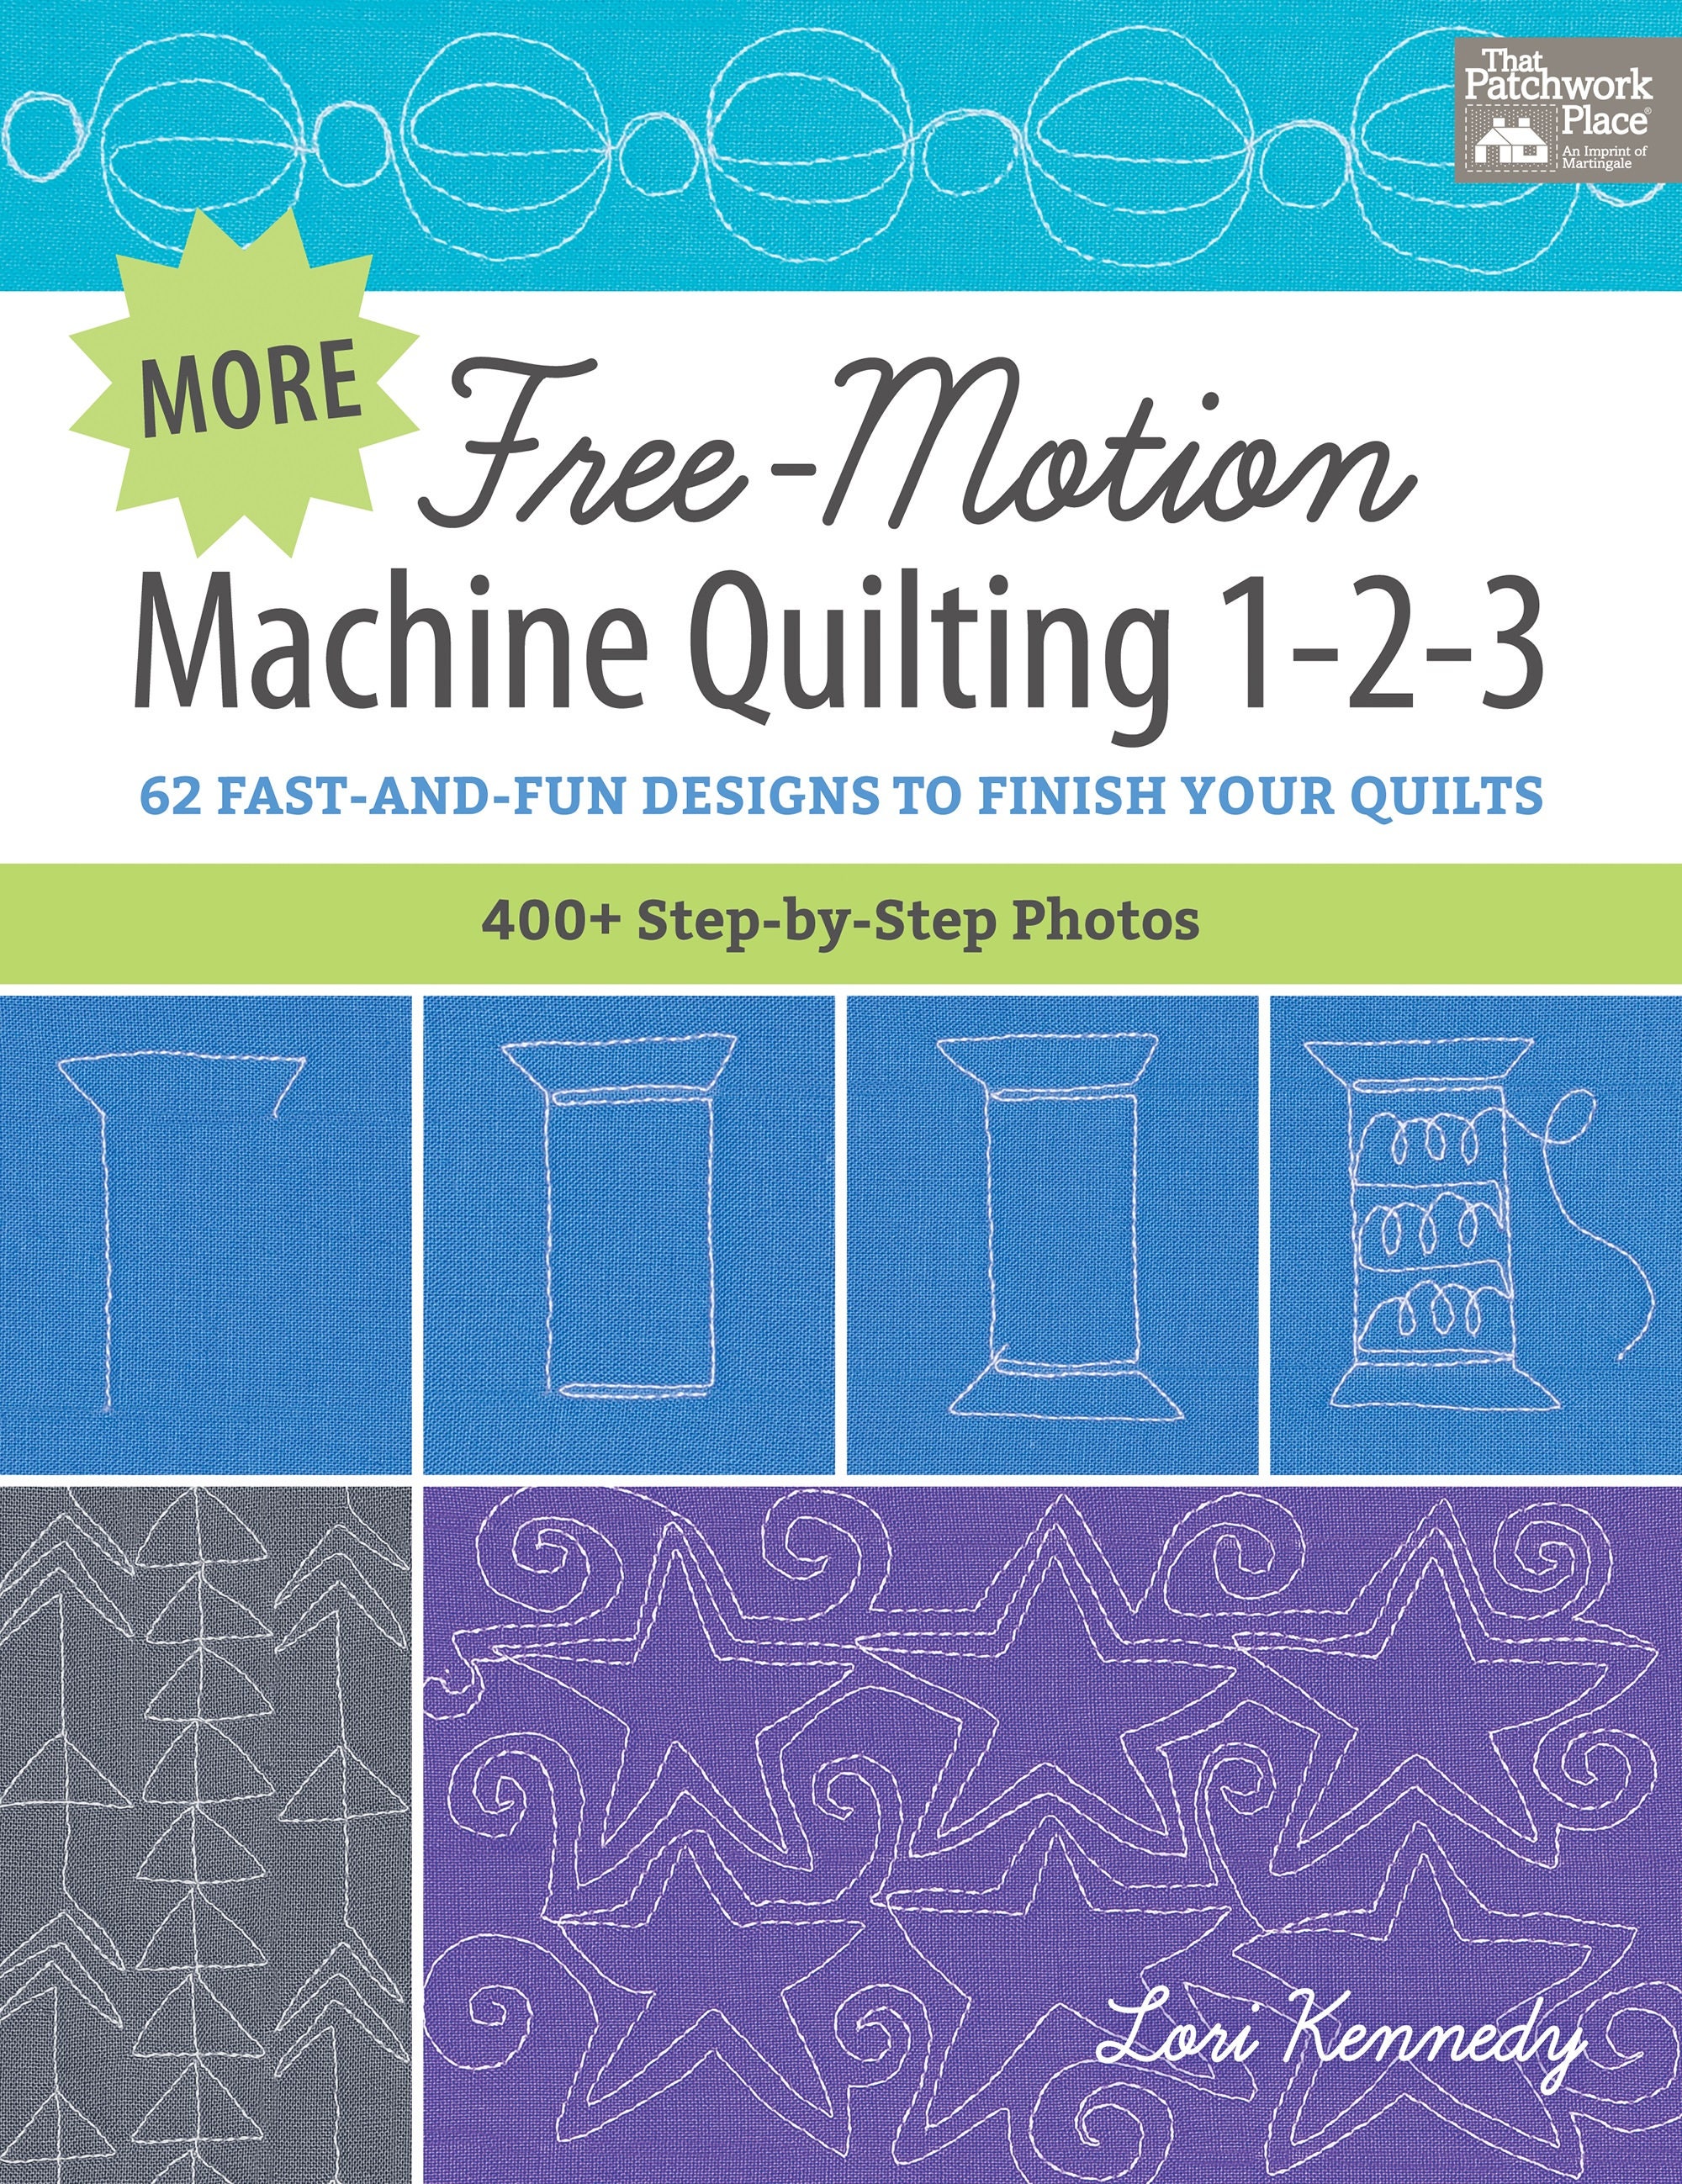 quilting, More Machine Quilting Patterns!